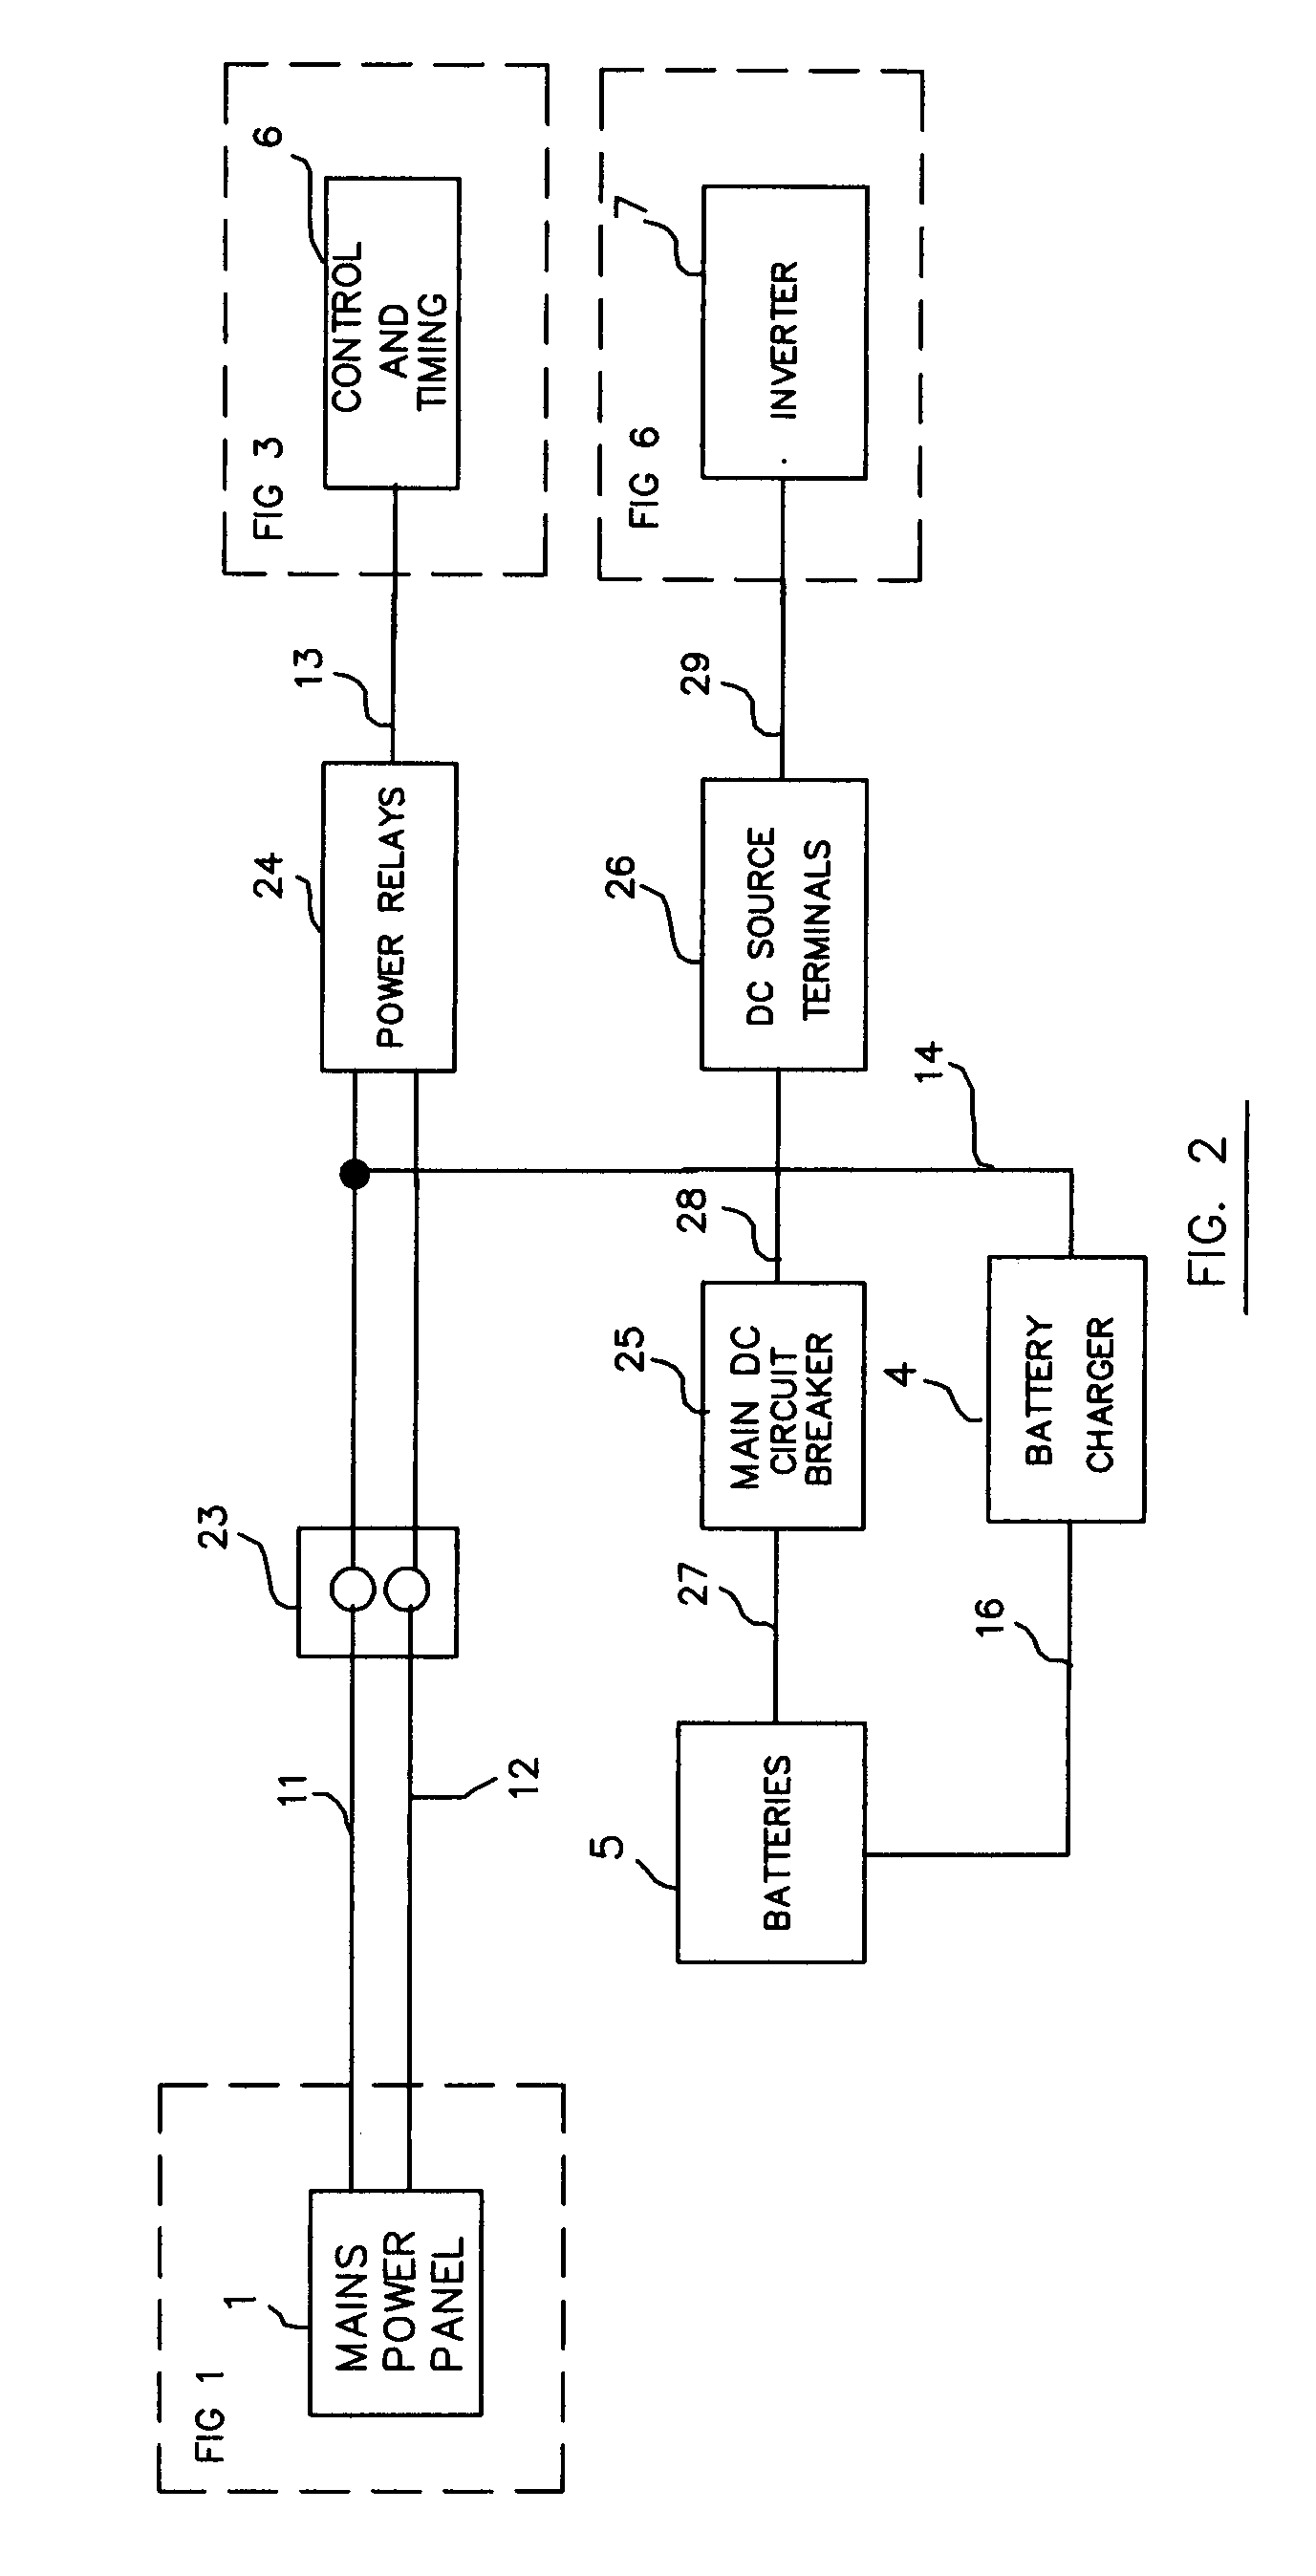 Backup power system for electrical appliances